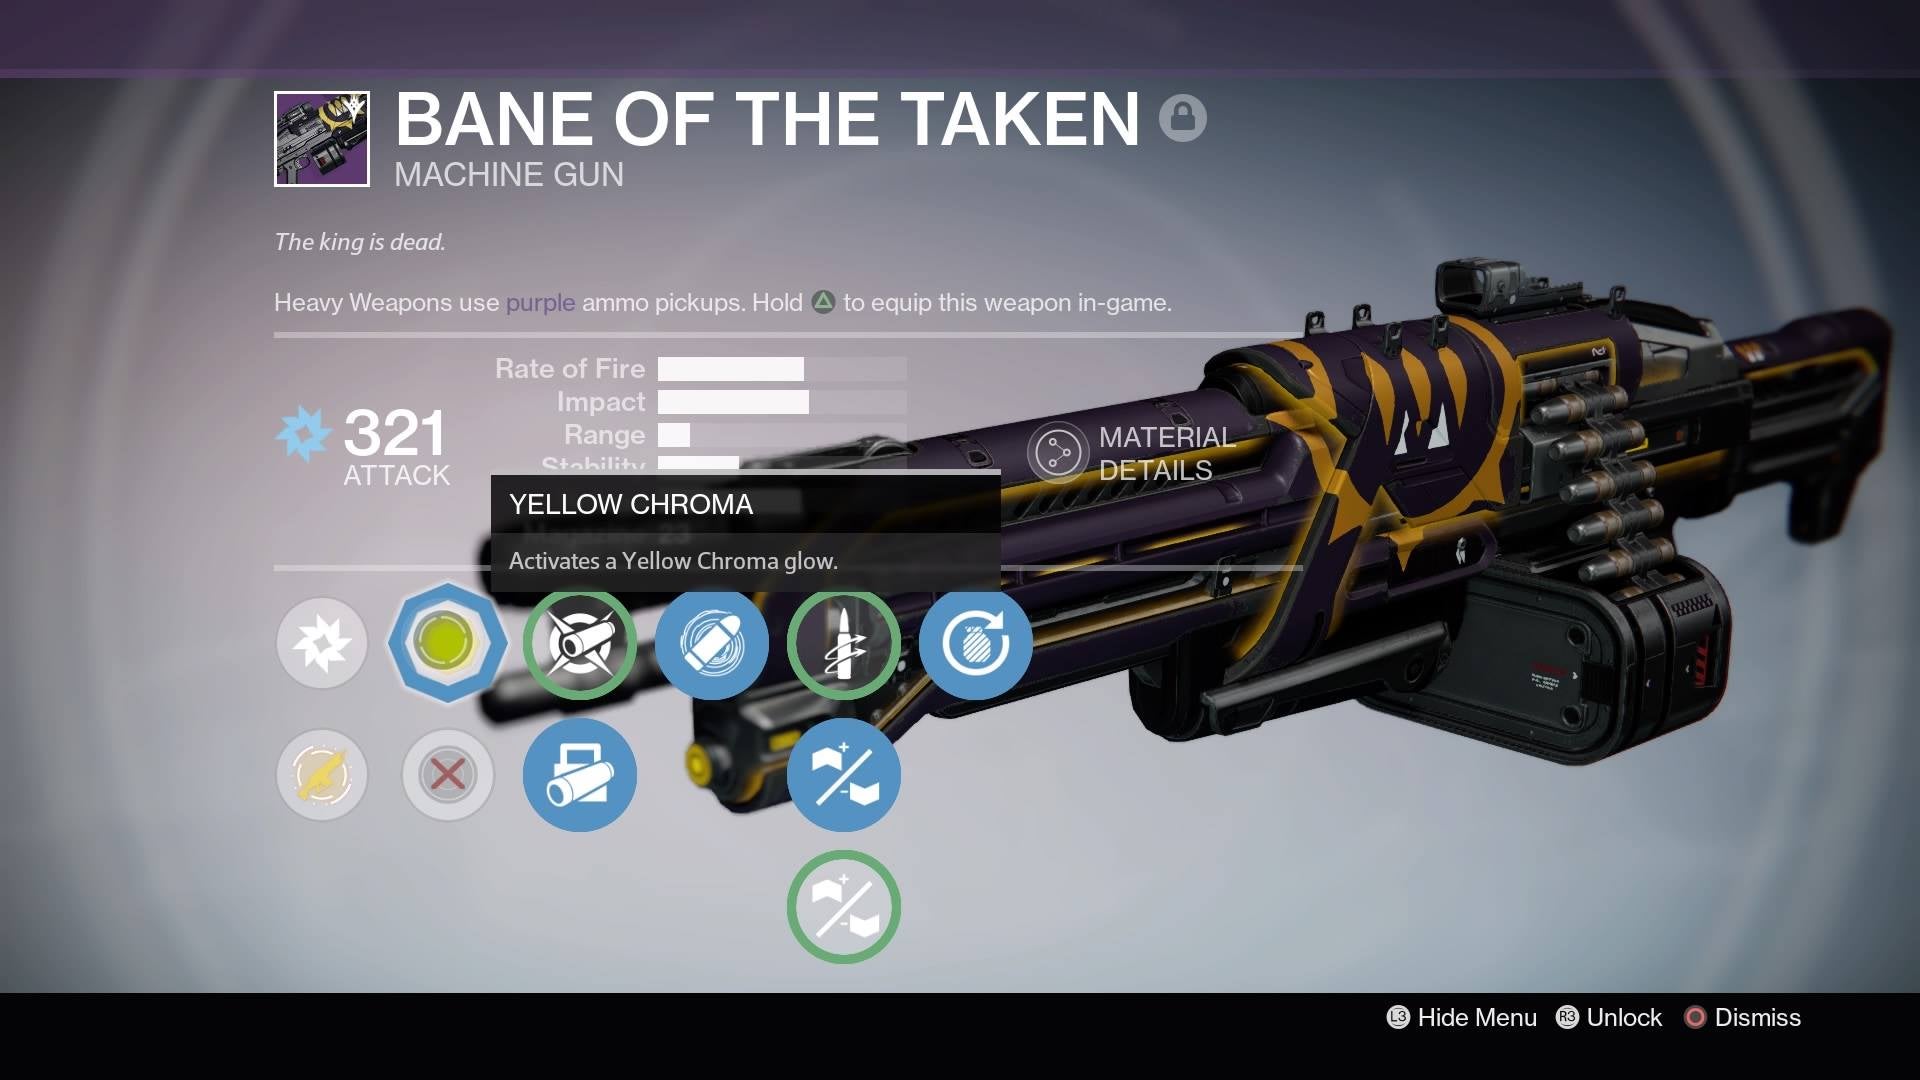 Image for Destiny's Chroma shaders: how to get them and how they work